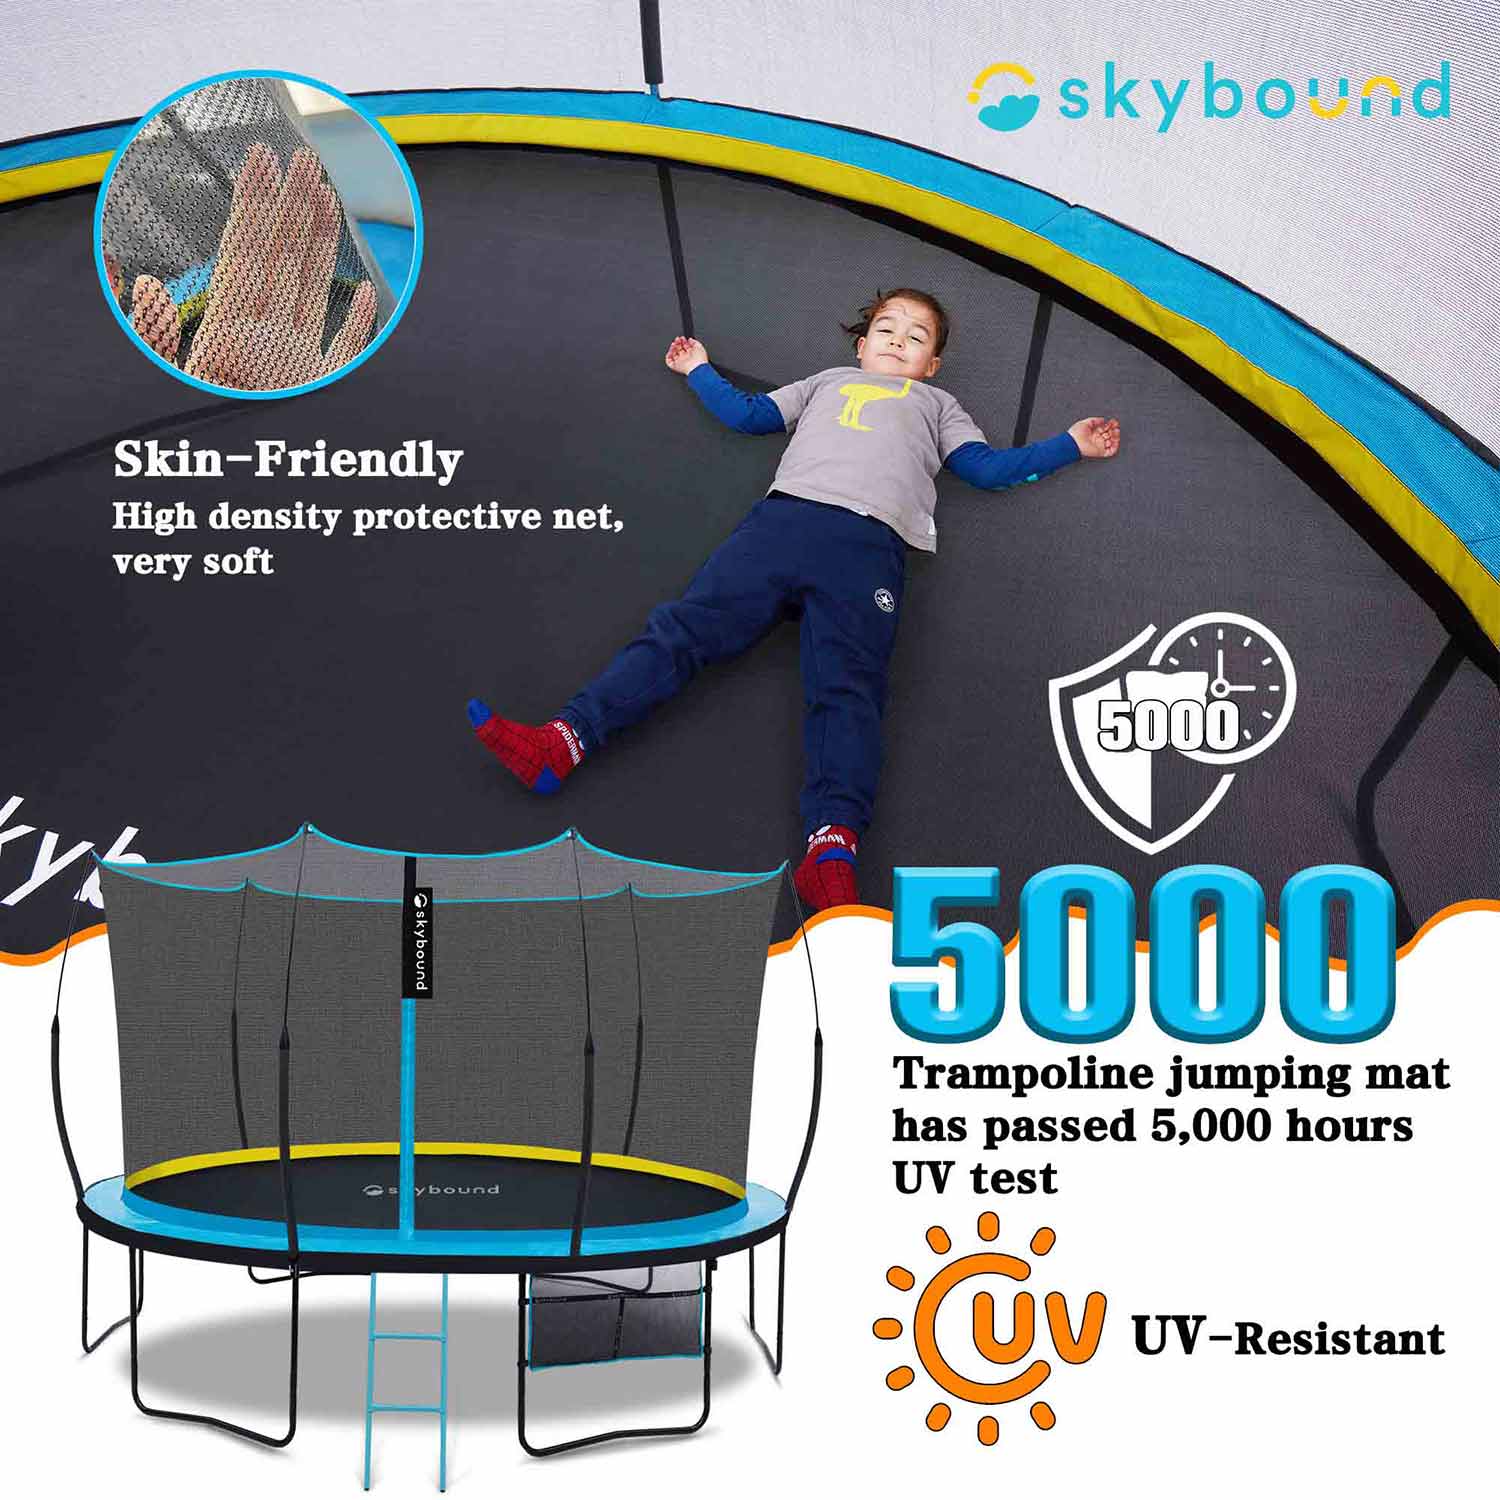 At the top, a little girl is lying on an 8ft trampoline, with a detailed image of the net in the top left corner. Below it reads "Skin-friendly high-quality softness." Beneath, next to the trampoline, it says "5000 UV tested, UV resistant."